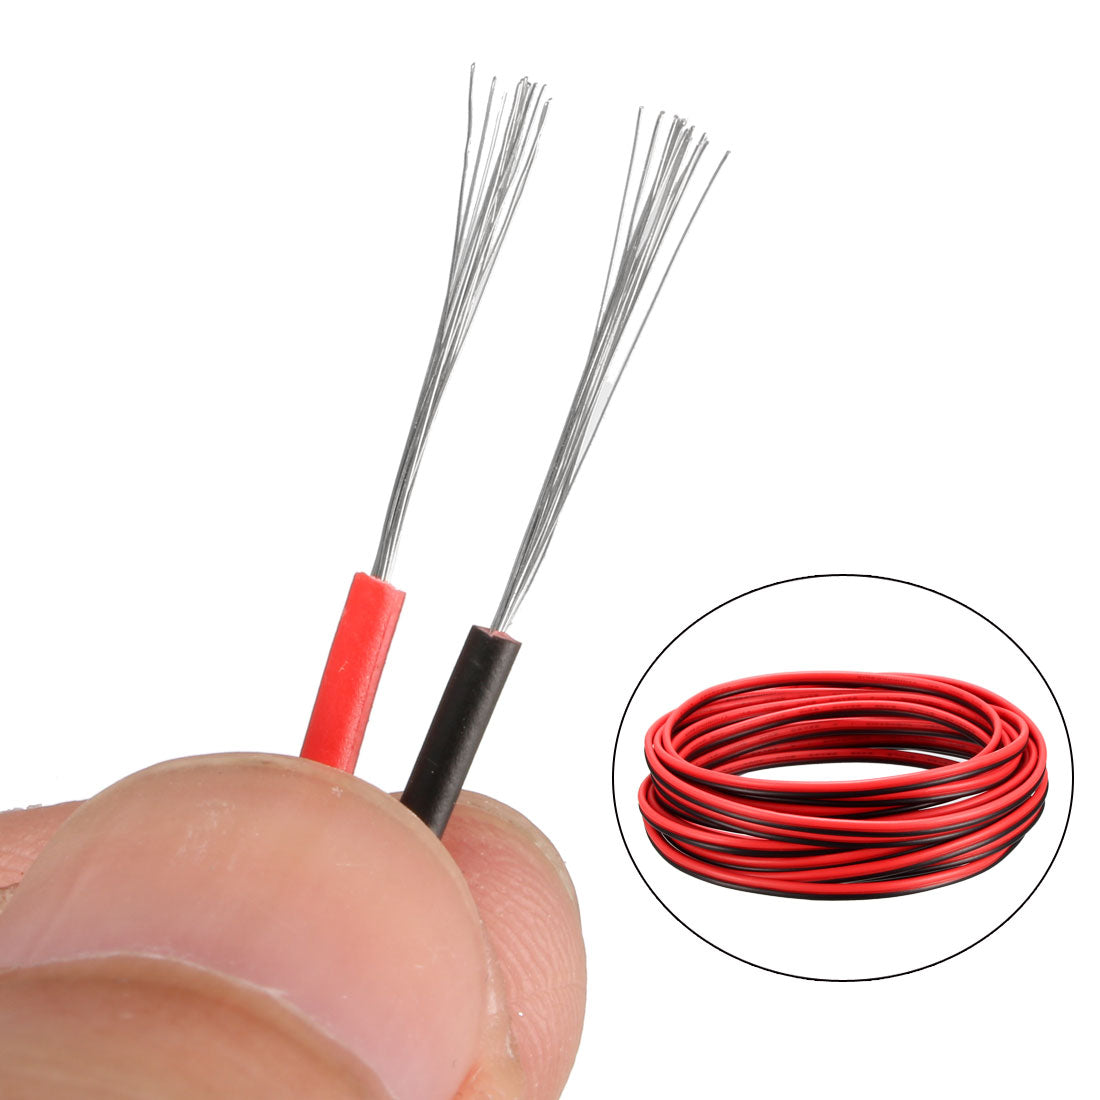 uxcell Uxcell Red Black Wire 2pin Extension Cable Cord 22 AWG Parallel Wire Tin Plated Copper 4M Length for LED Strip Light